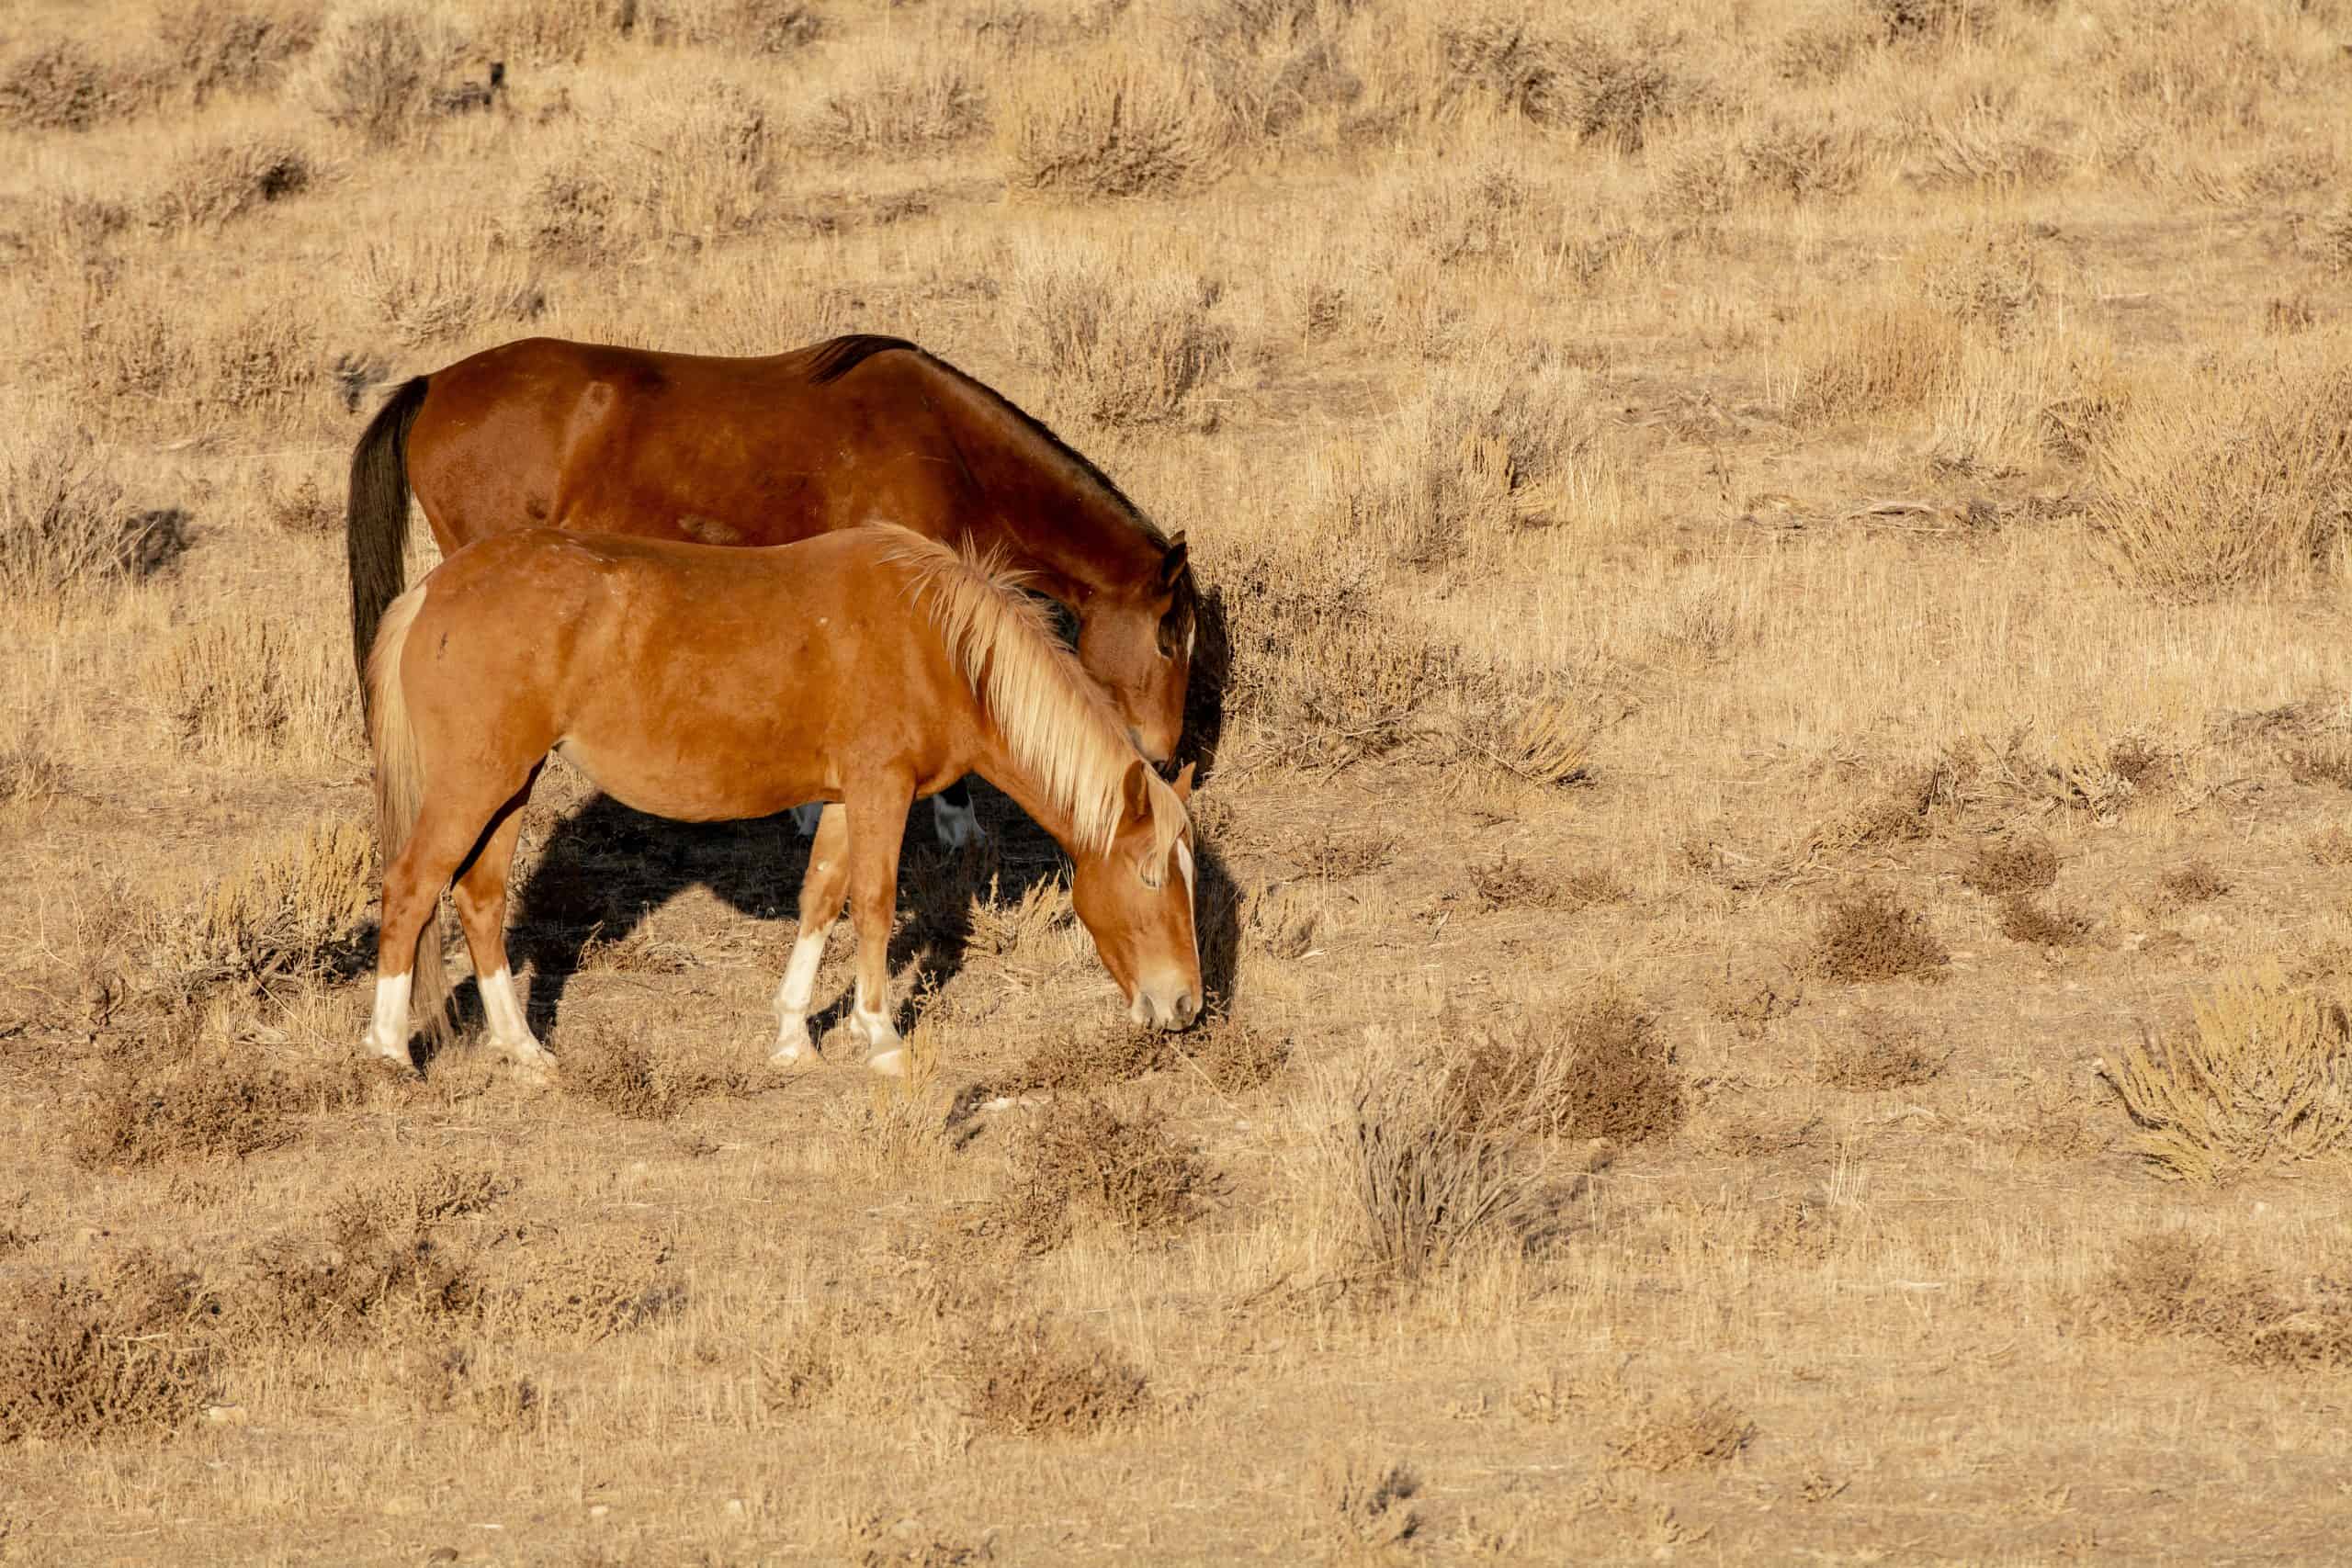 Two brown mares in a desert in Nevada, USA, grazing together in dry grass